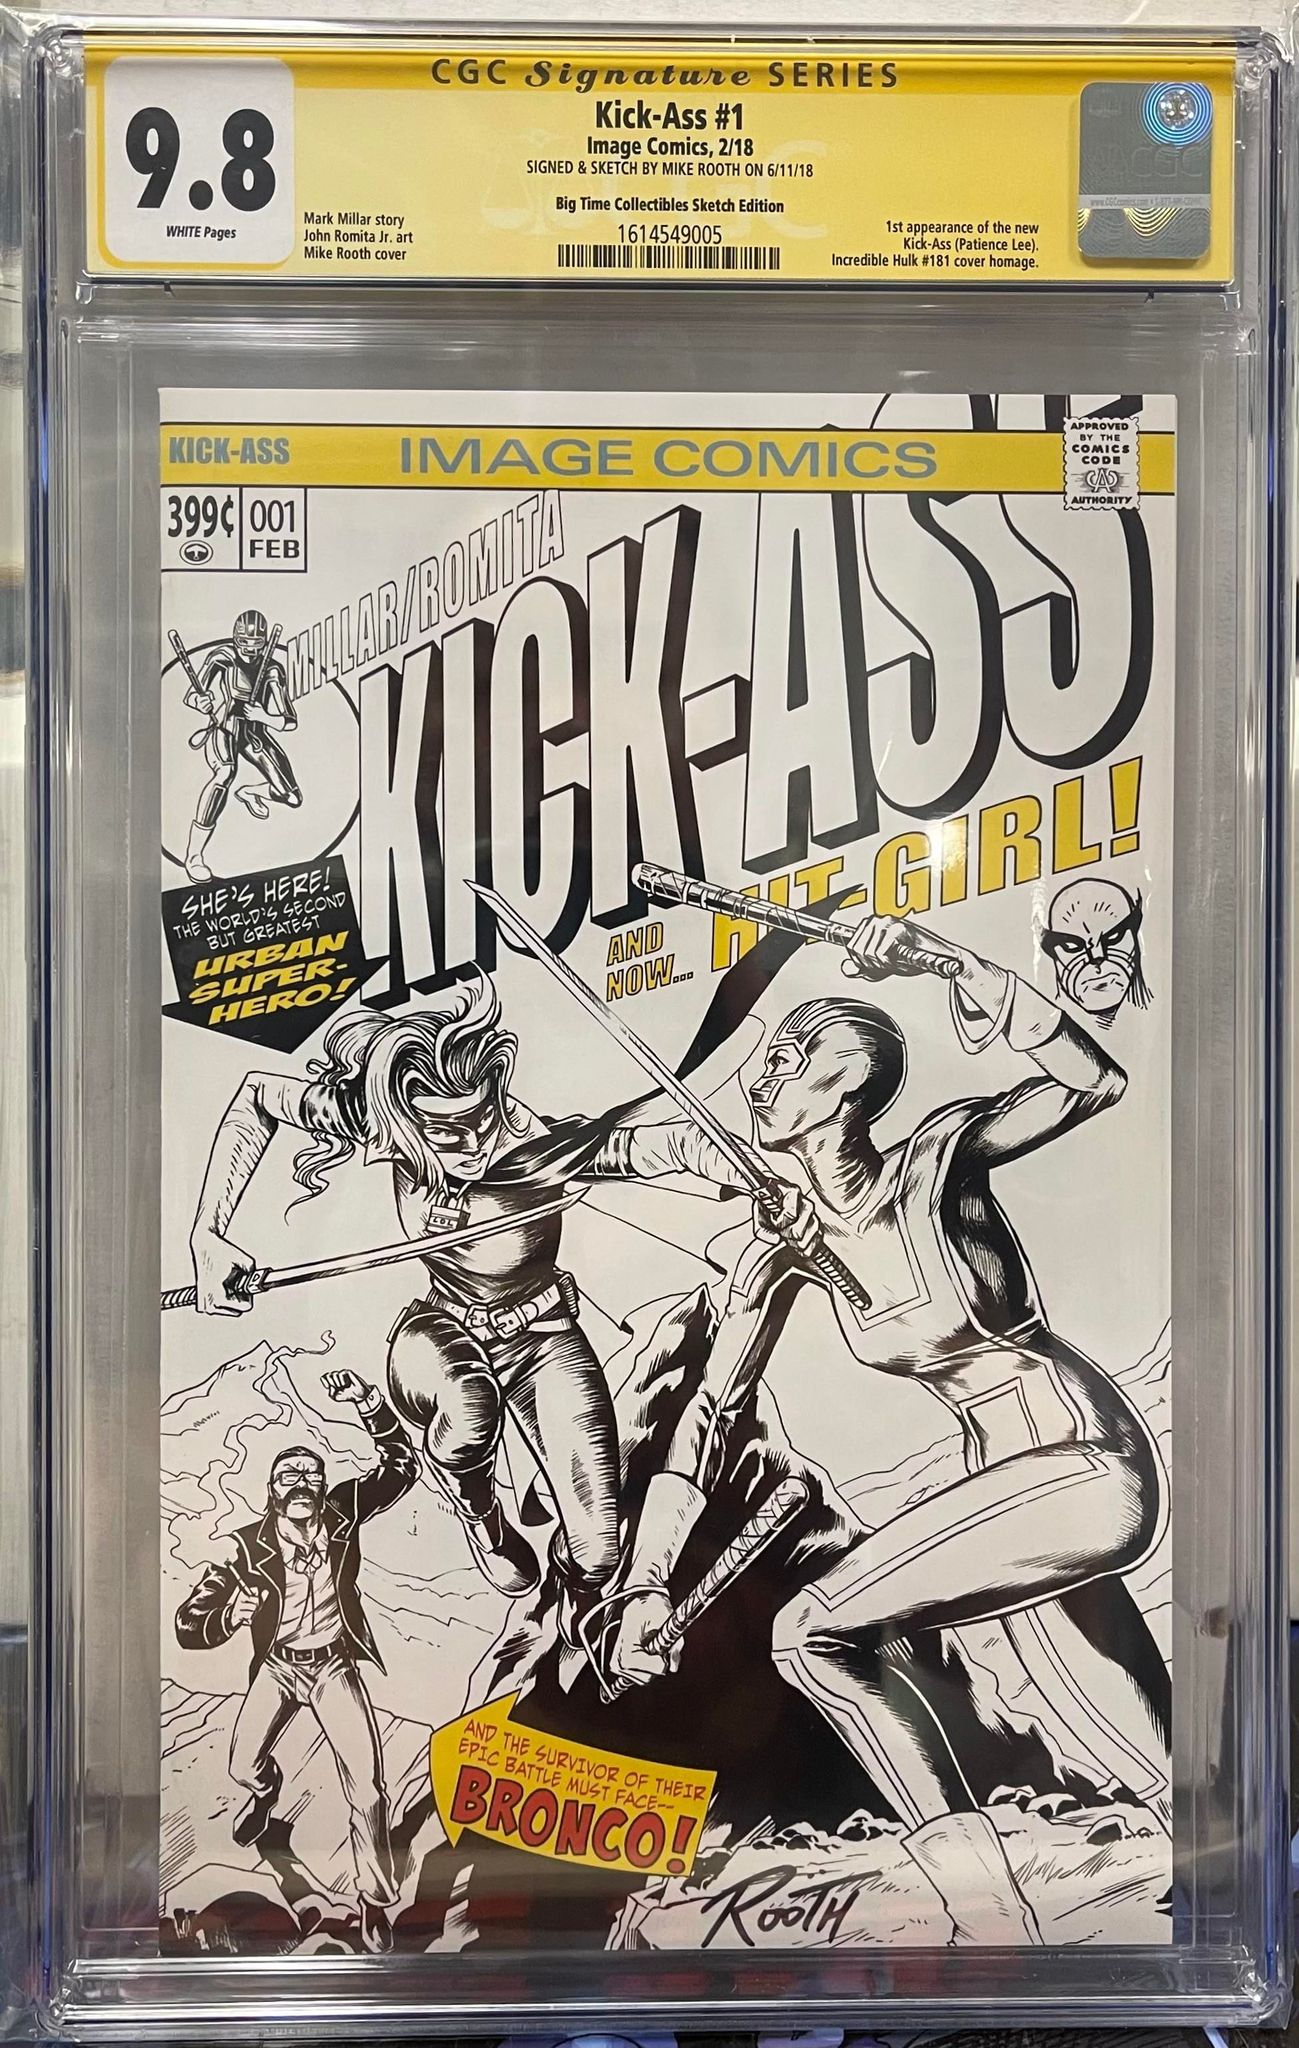 KICK-ASS #1 BTC EXCLUSIVE SKETCH COVER CGC 9.8 W/WOLVERINE REMARK BY MIKE ROOTH